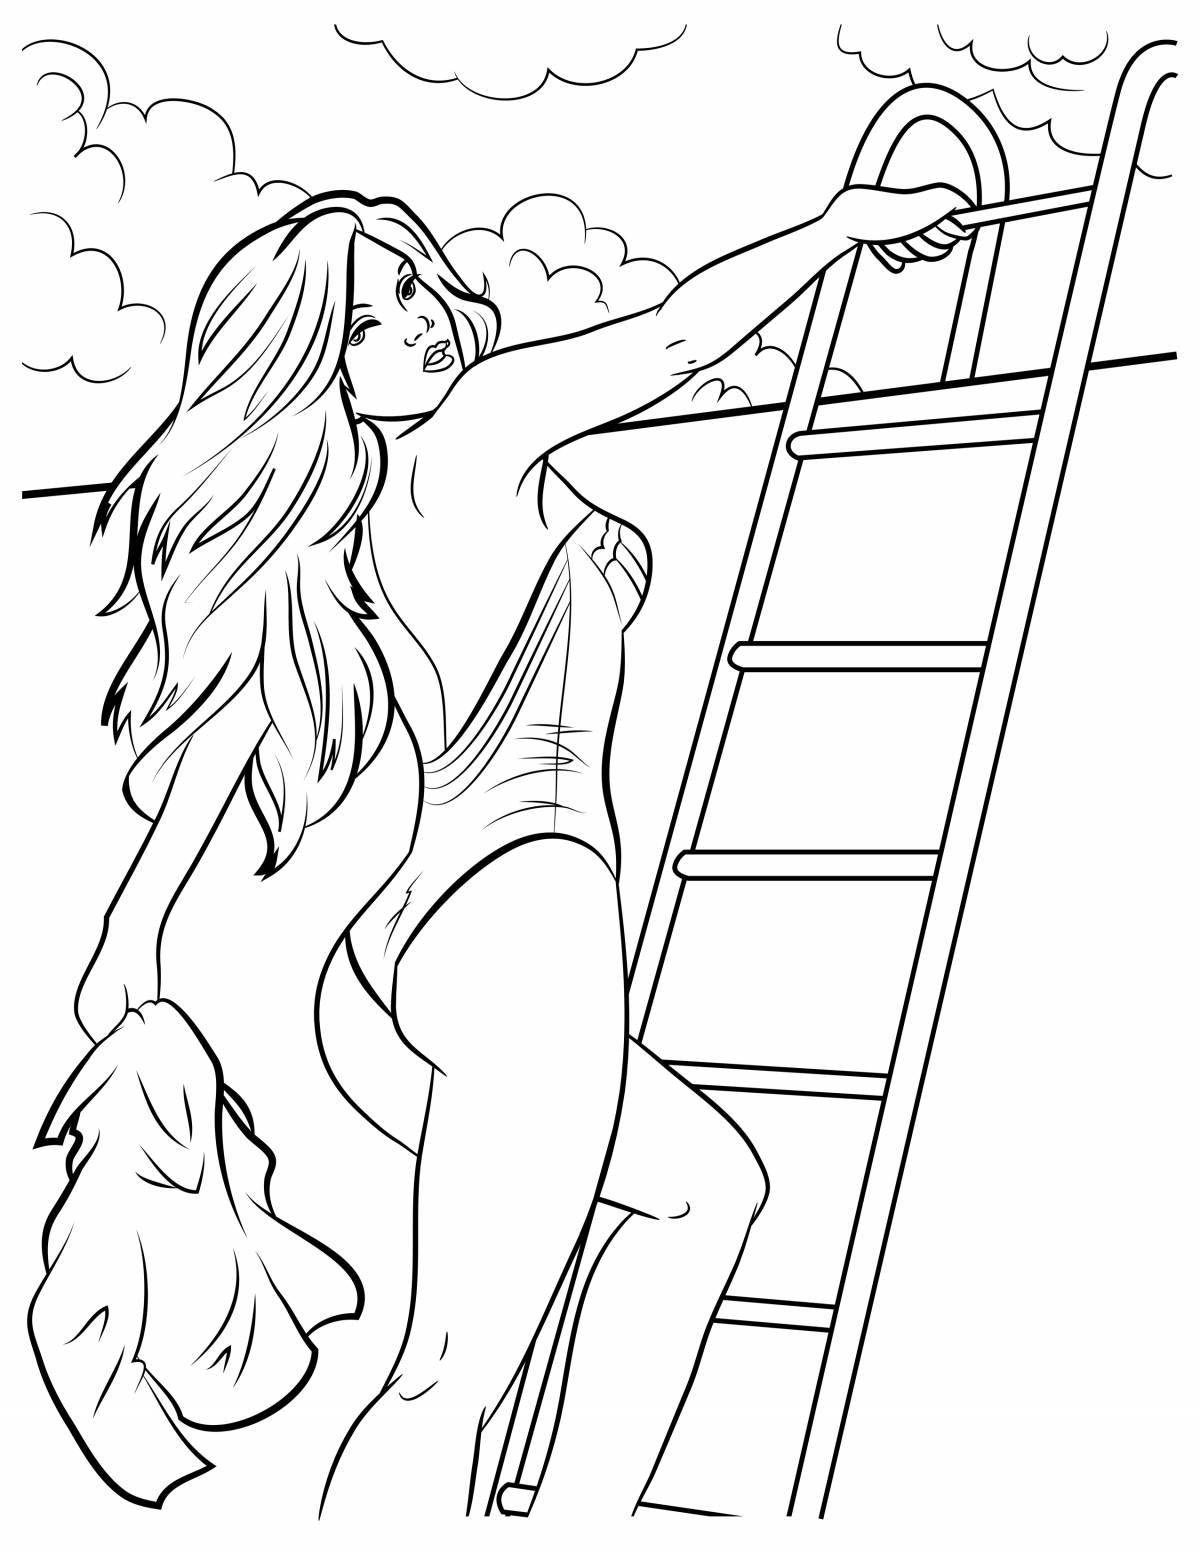 Intense coloring page 18 vulgar на android